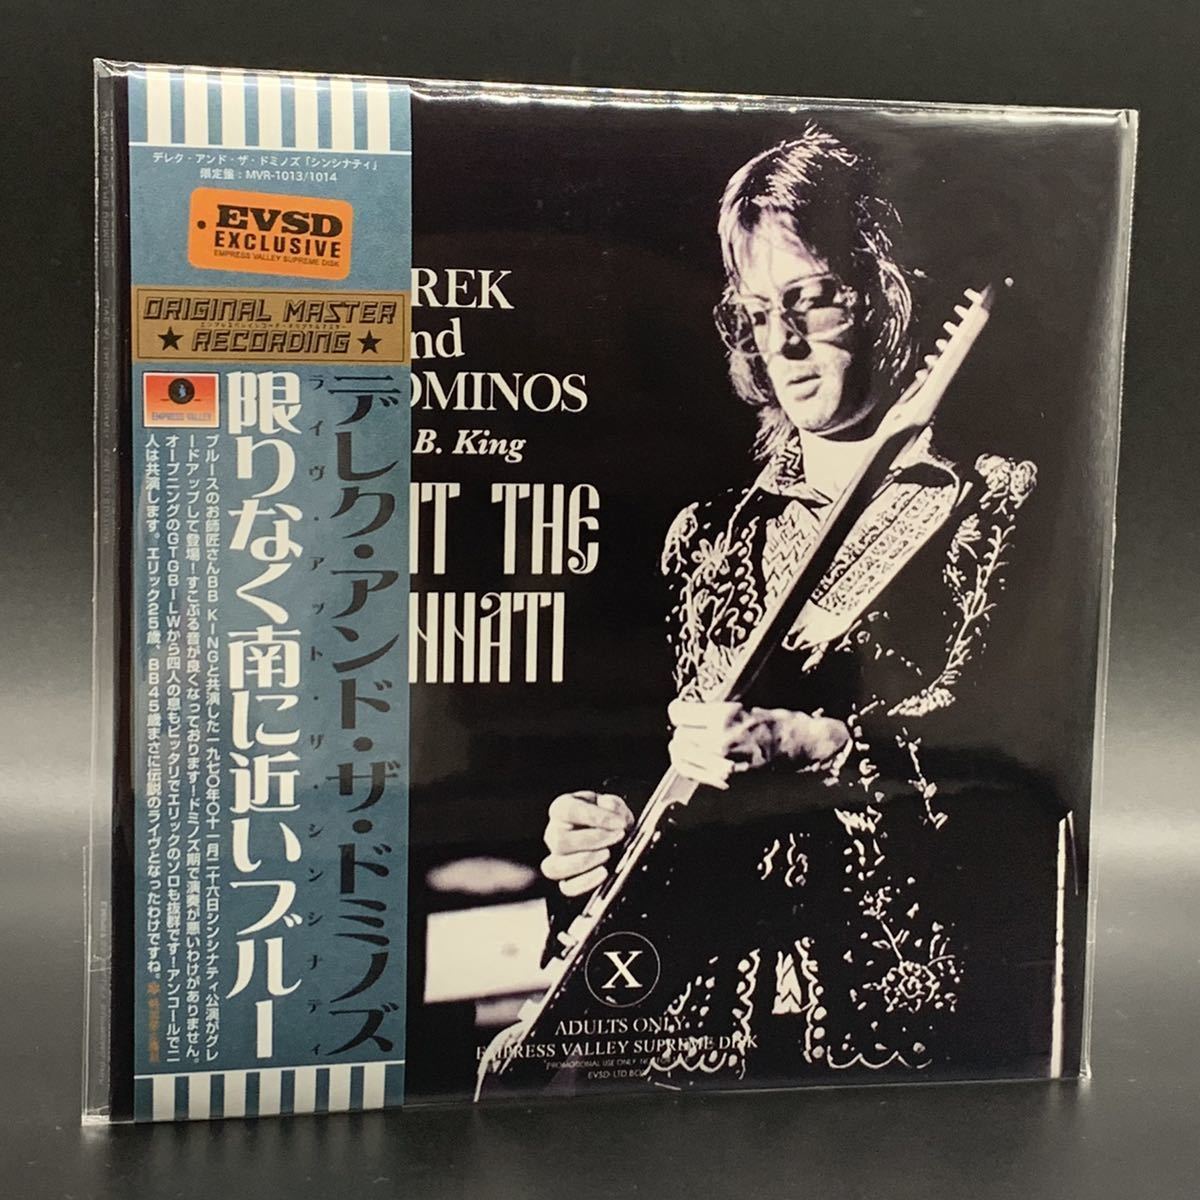 DEREK AND THE DOMINOS with B.B. KING : LIVE AT CINCINNATI 1970 マスターテープ使用 MID VALLEY RECORDS 世紀の共演！タイムセール！_画像1